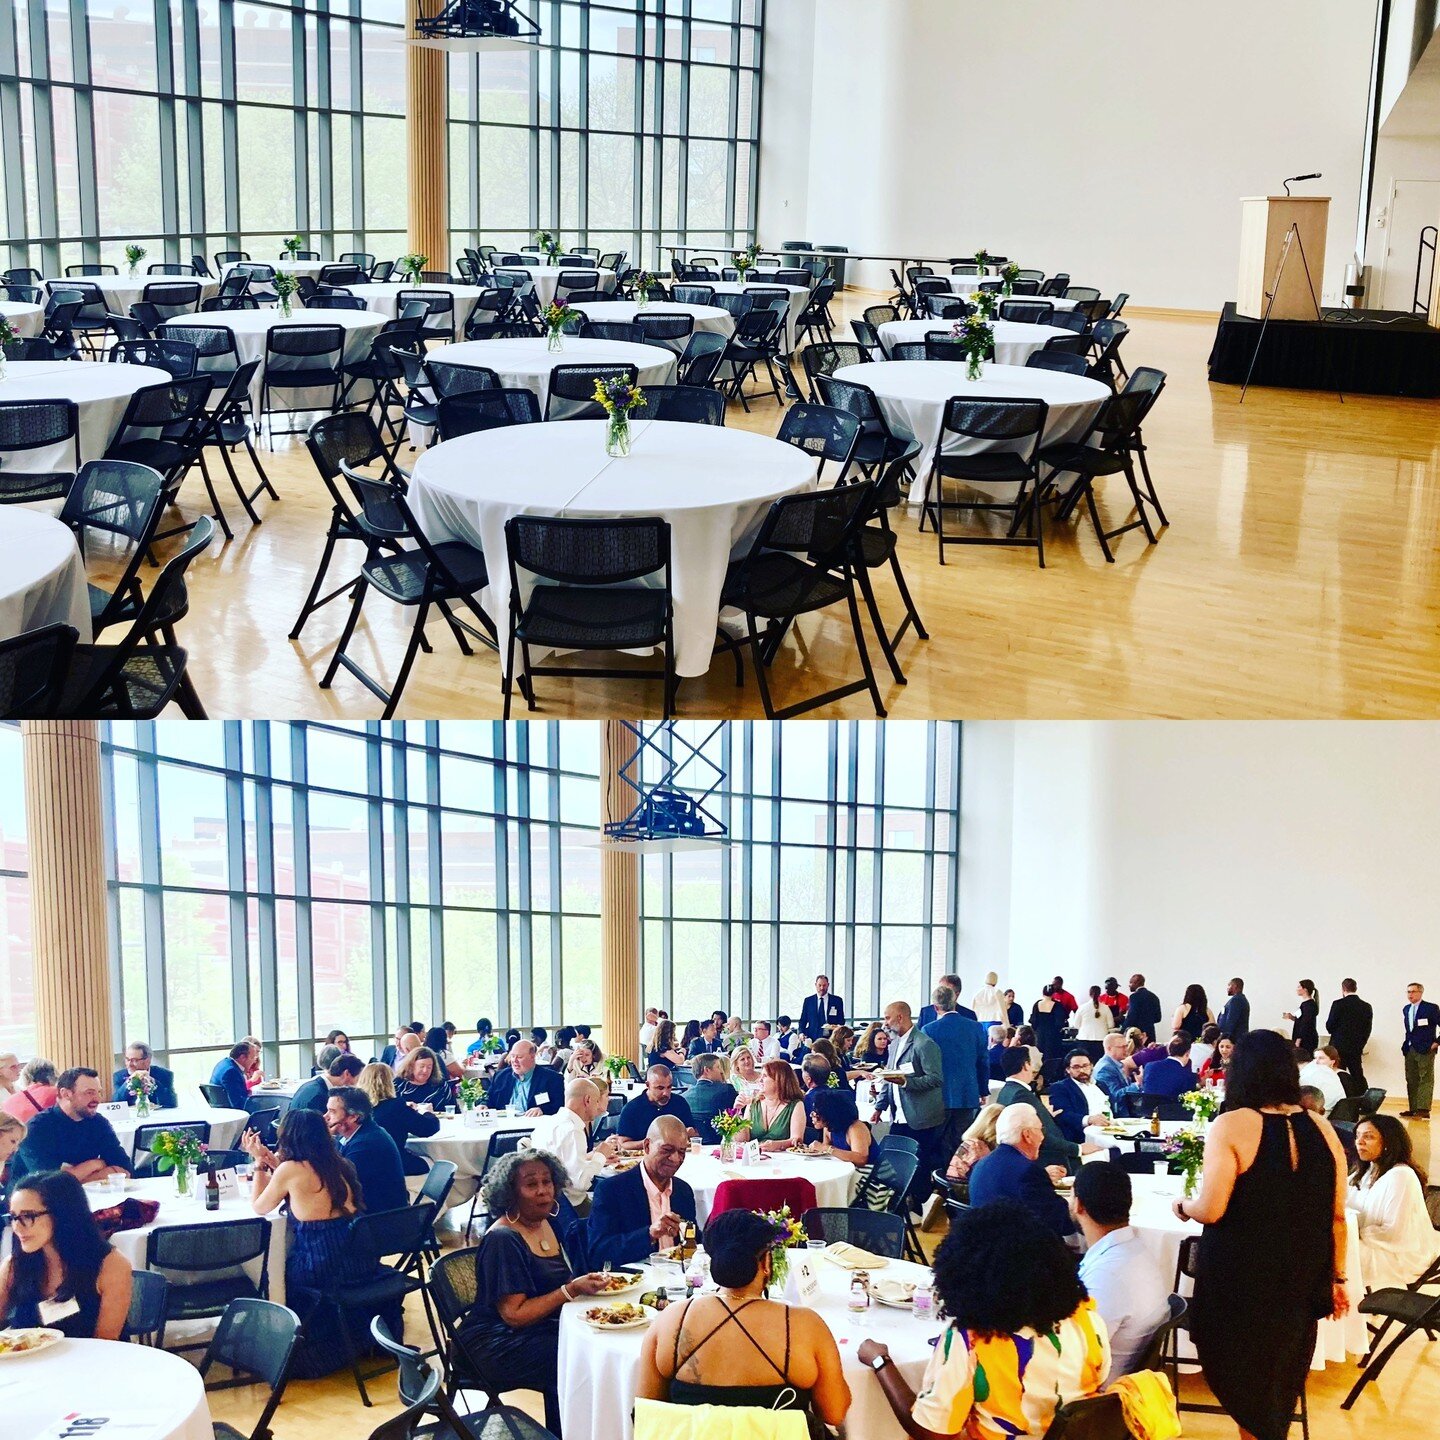 Before and After!
Our Raise a Racquet gala was an amazing evening celebrating our high school and post secondary graduates in a truly spectacular way at the @umnrecwell. 
A tremendous thank you to everyone who attended and supported Beyond Walls- wha